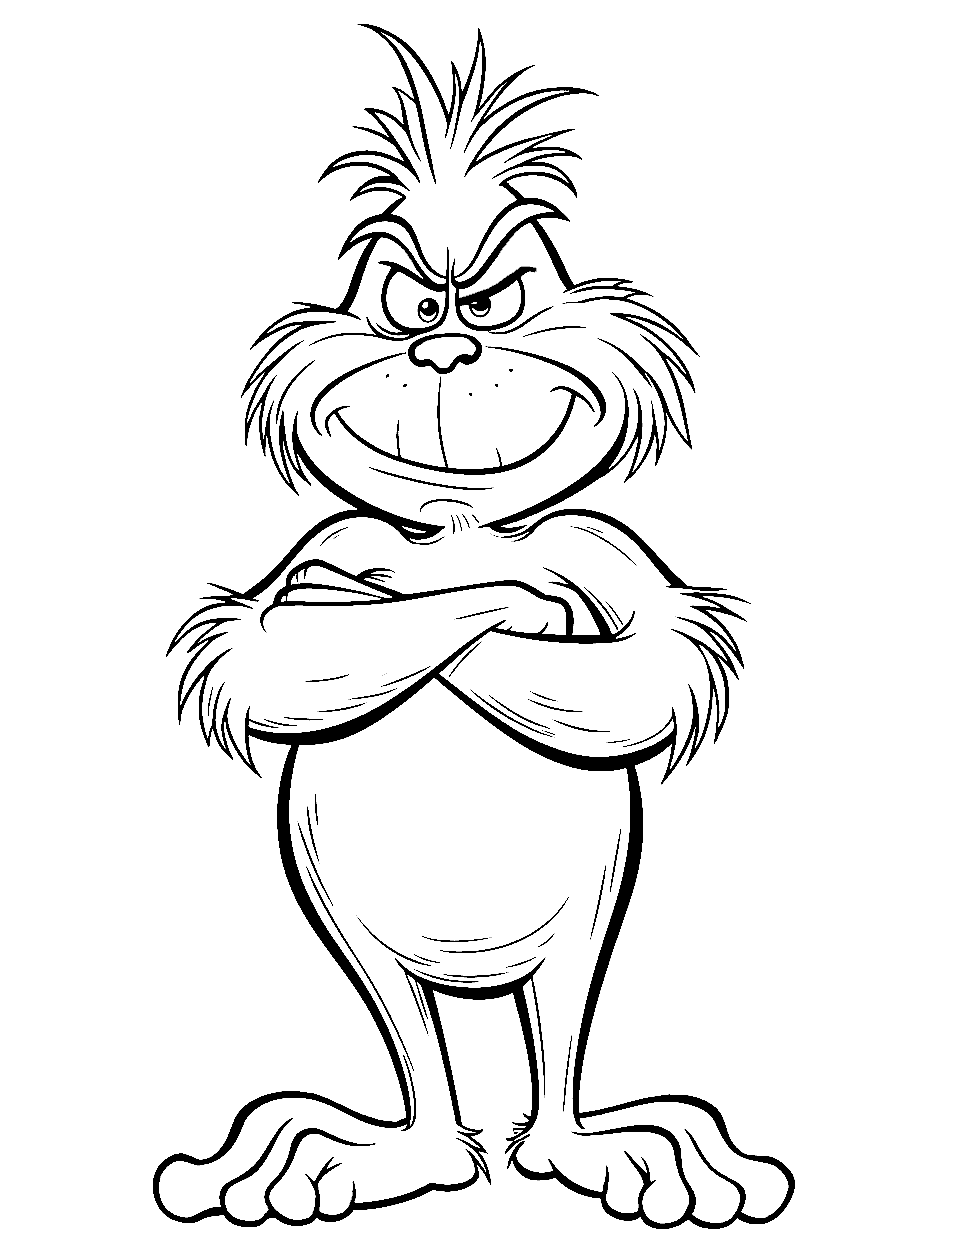 Mad Grinch Coloring Page - The Grinch frowning with crossed arms.